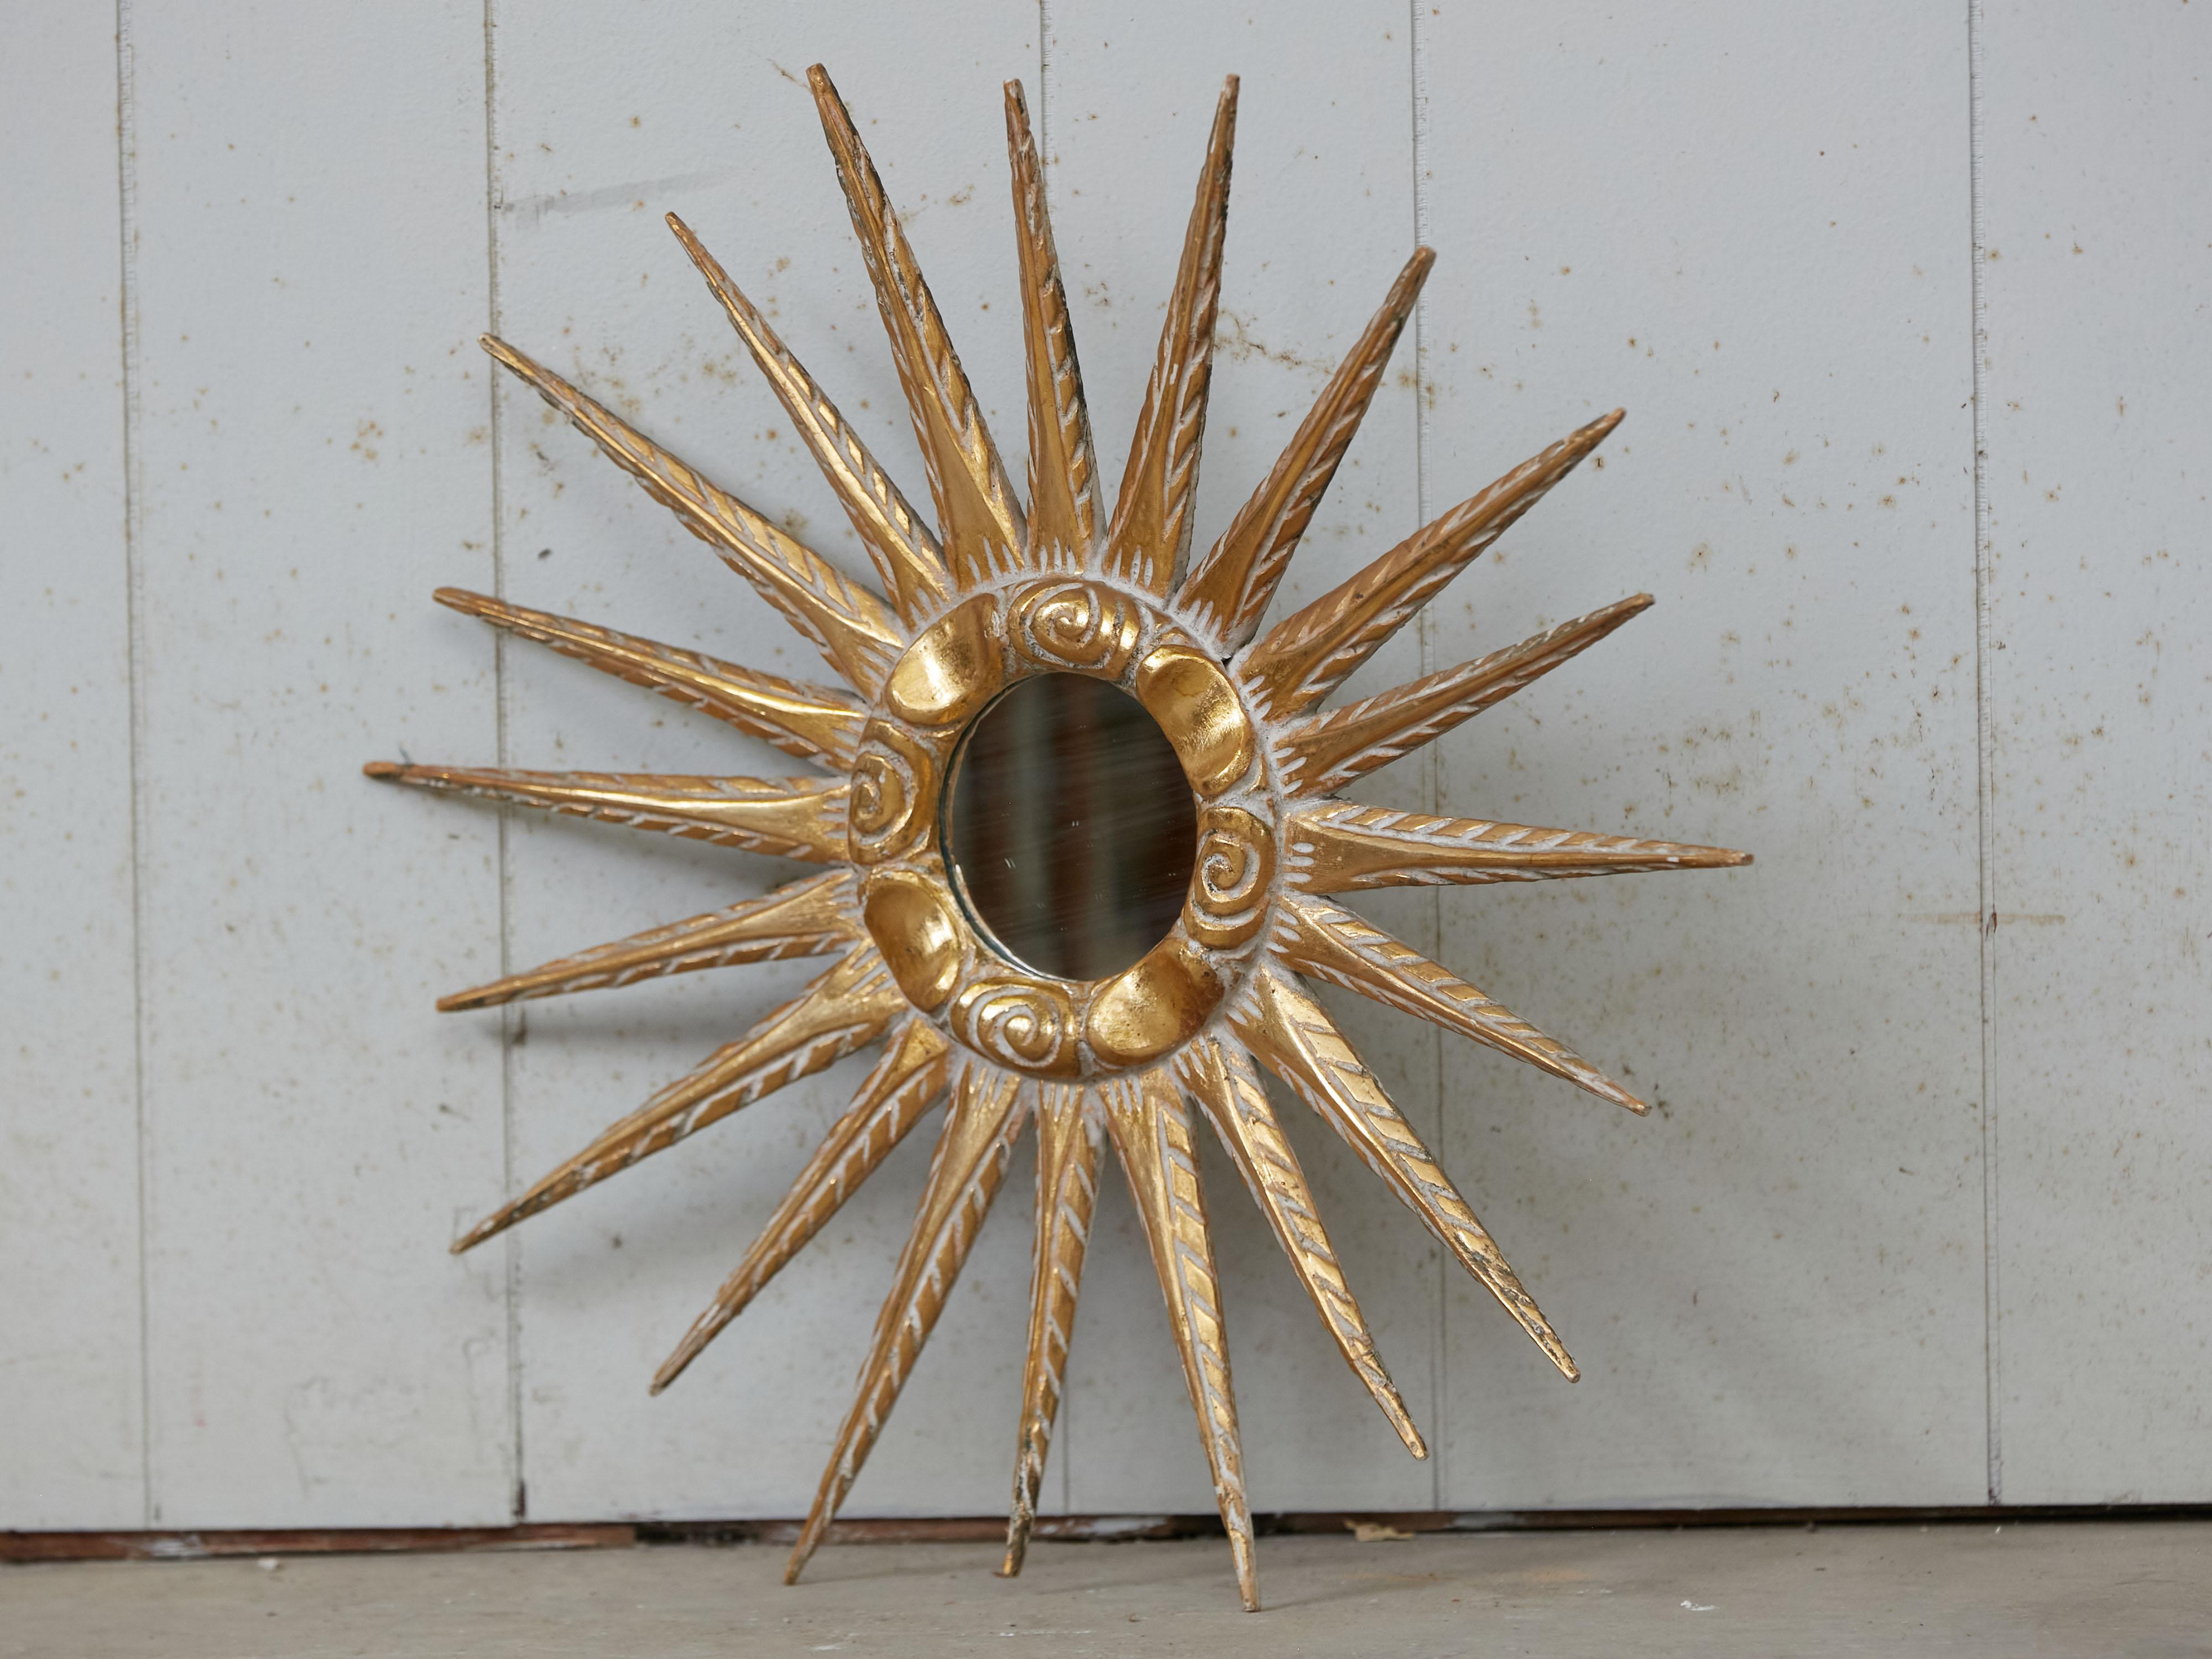 Carved Midcentury French Giltwood Sunburst Mirror with Cloudy Frame, circa 1950